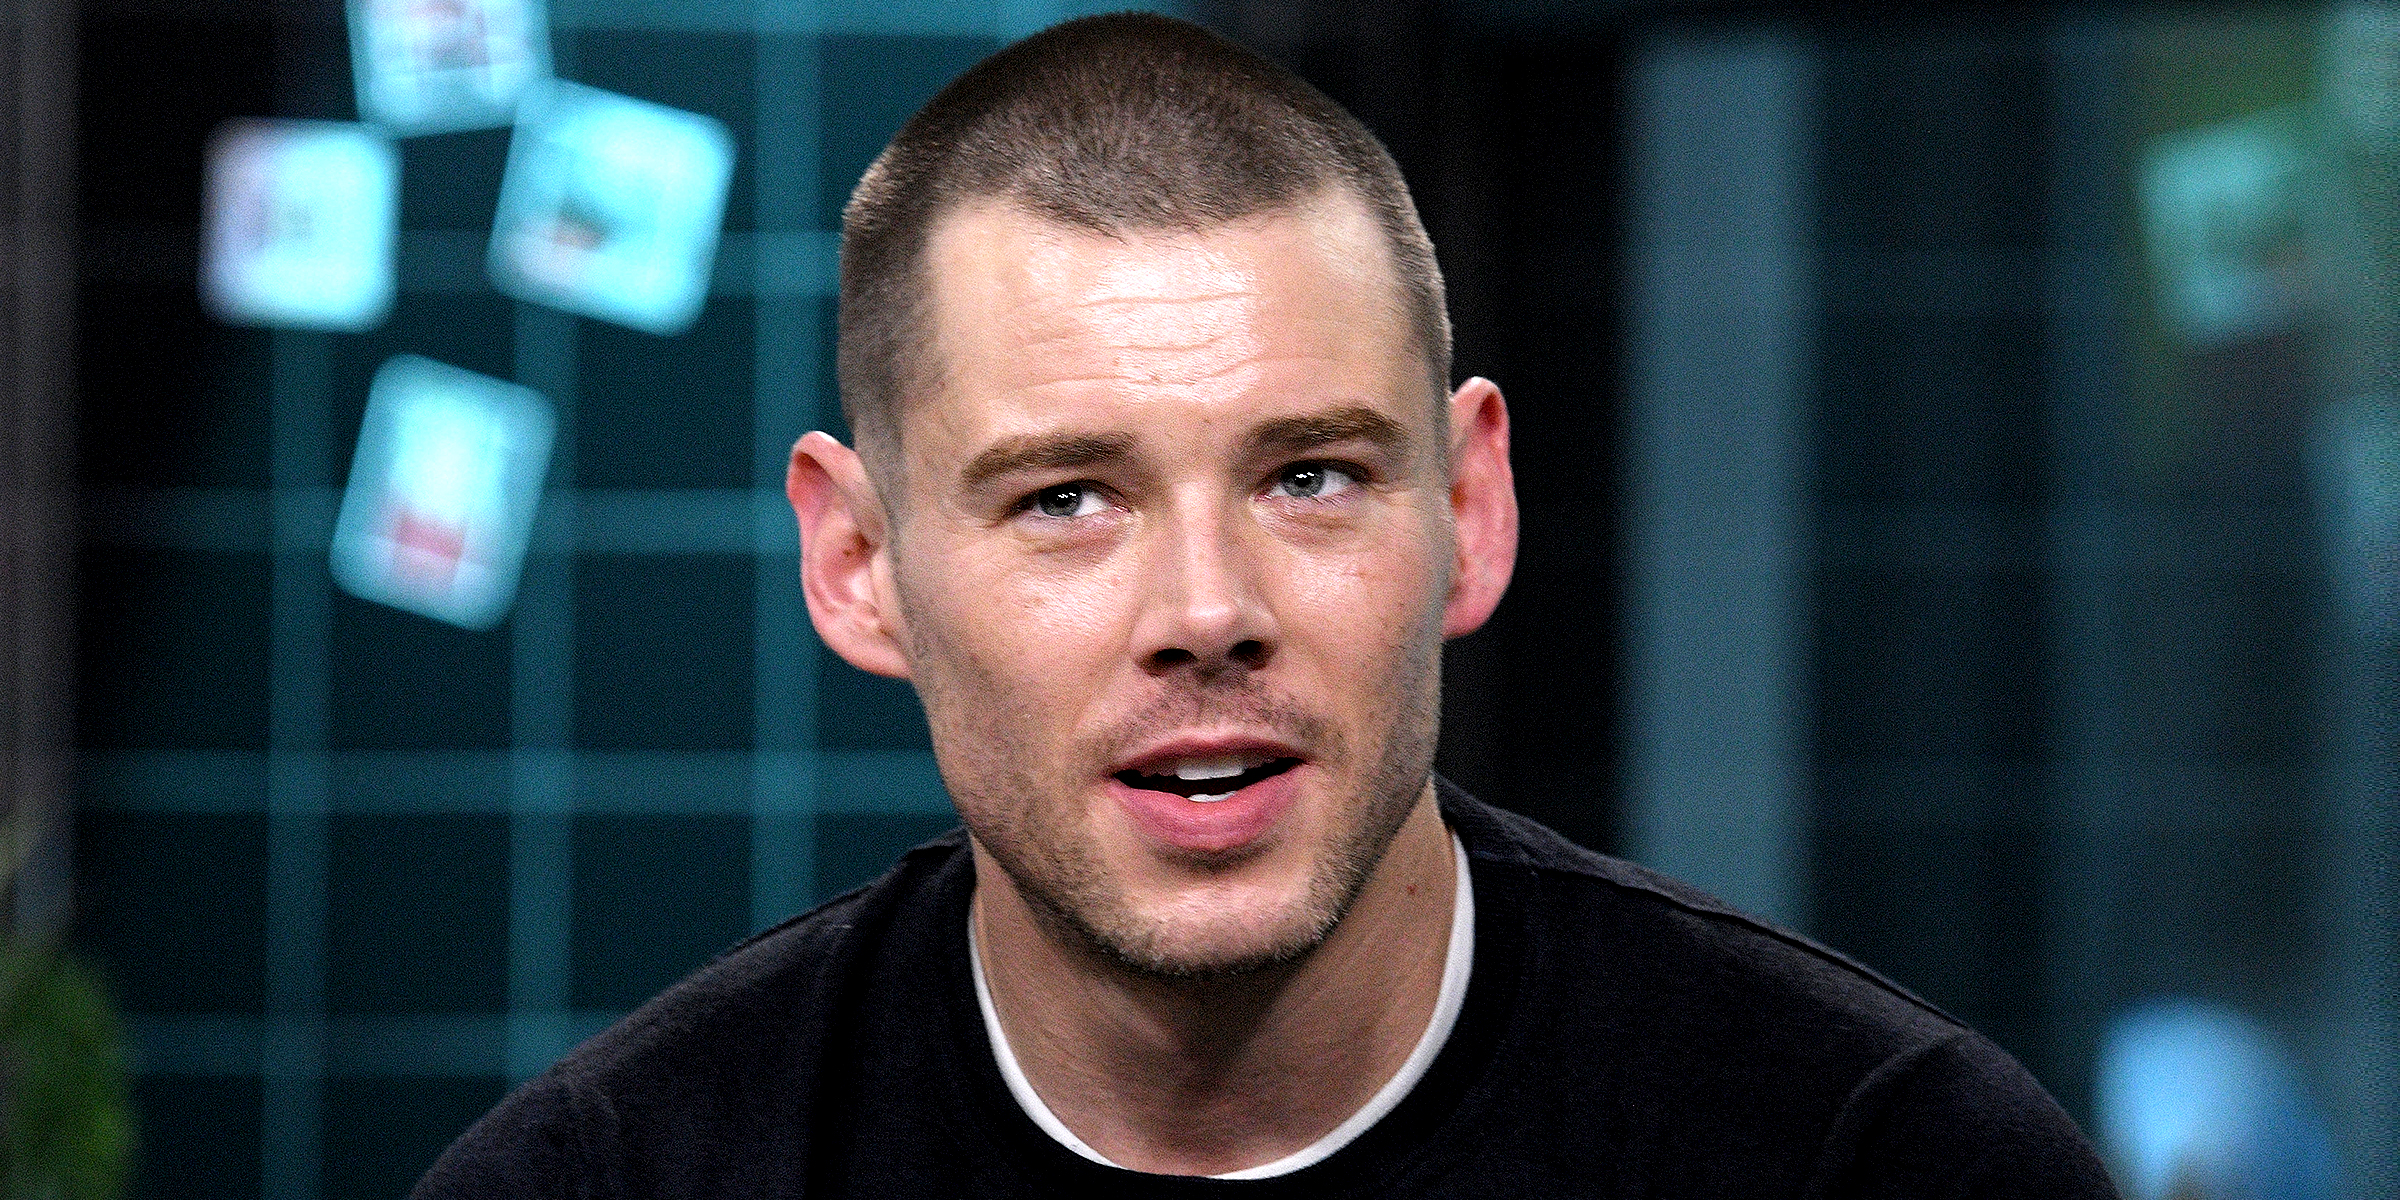 Brian J. Smith | Source: Getty Images